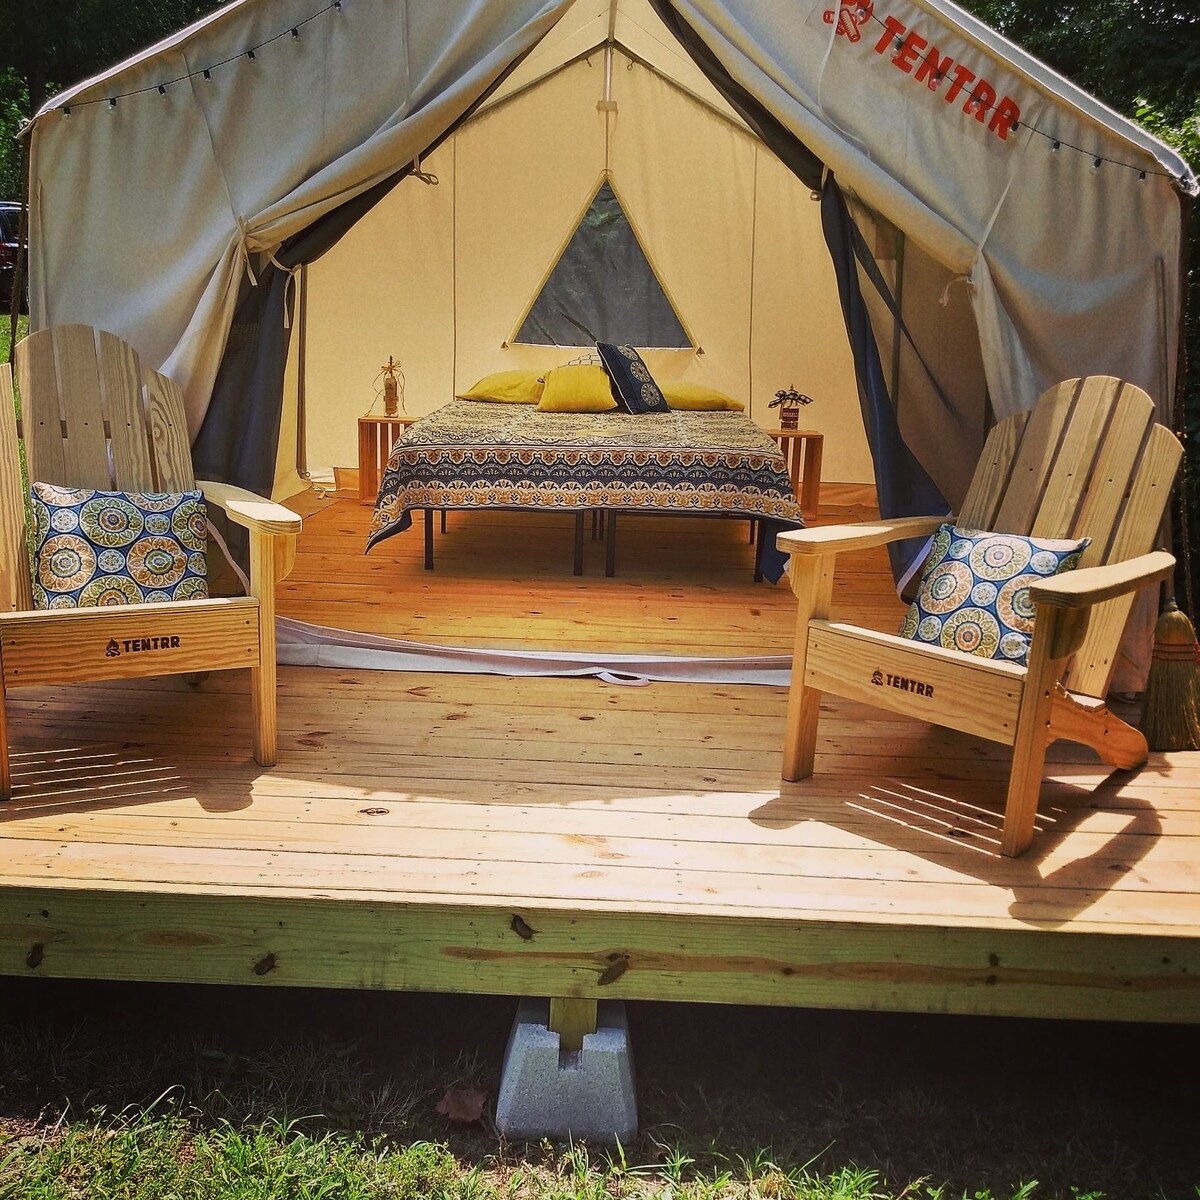 Bourbon Trail Ky Luxury Glamping Cabin&Tent